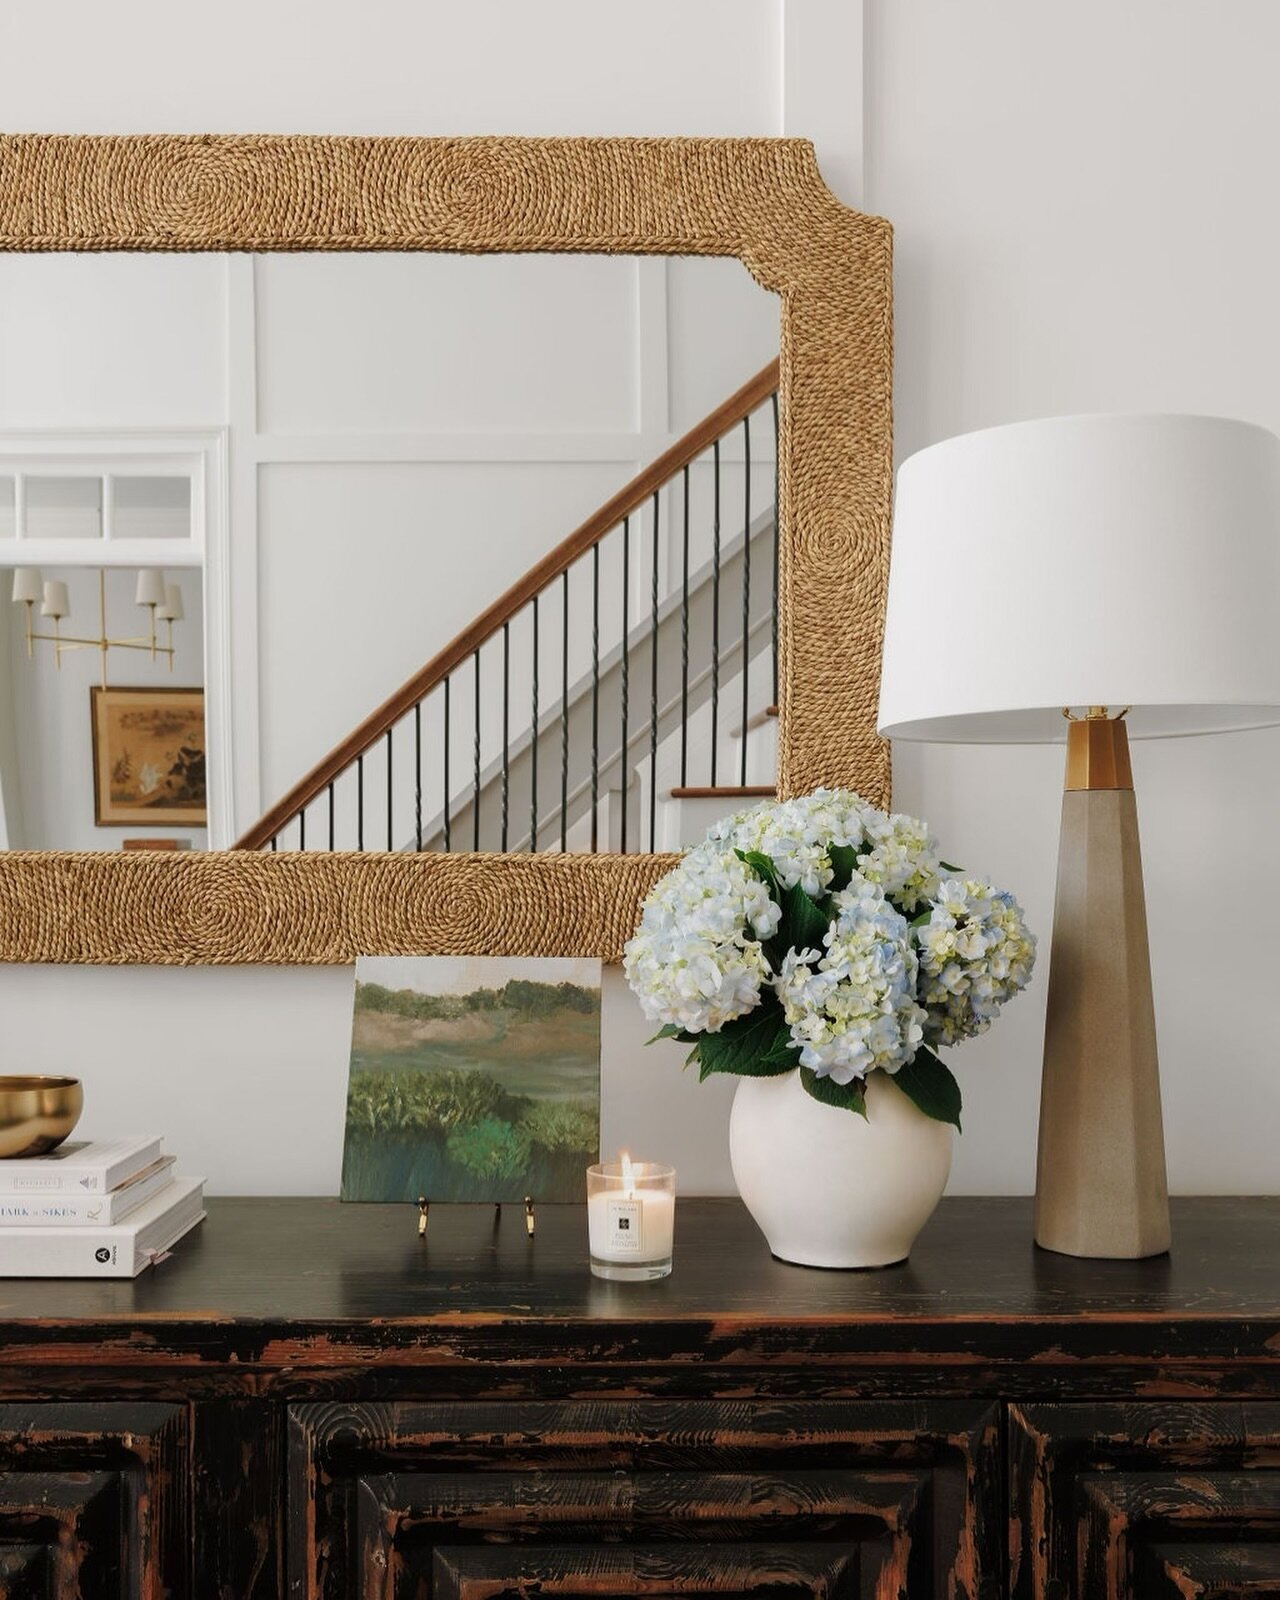 The first glimpse you or your guests get of your home - the entryway or foyer! We like to be thoughtful in our approach to this area and make sure that is not only functional but also a beautiful introduction of what to expect throughout the home. It